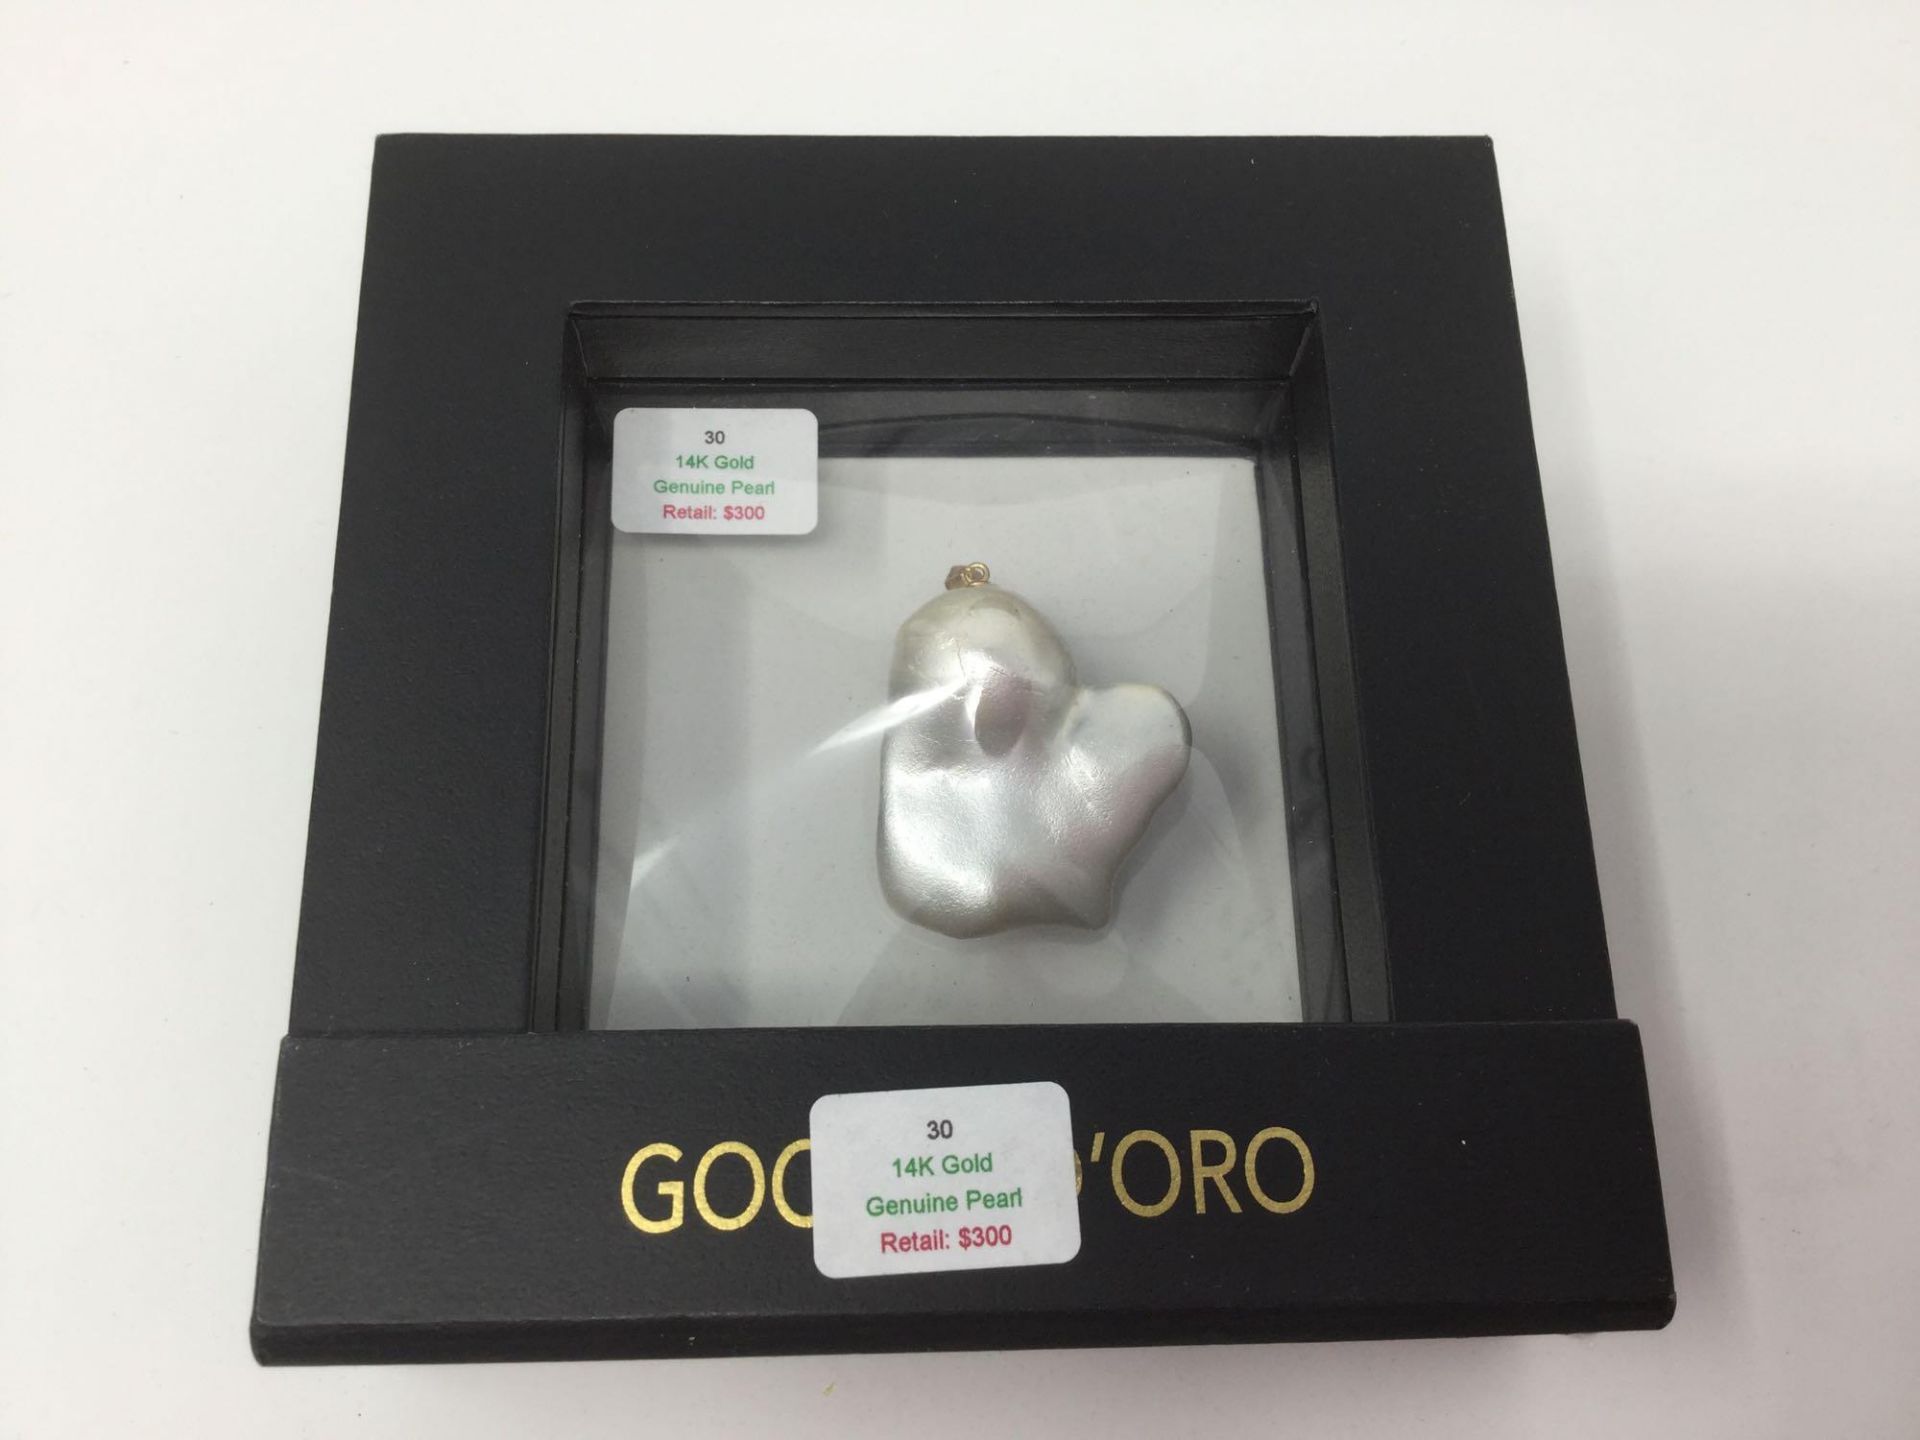 14KT Gold Genuine Pearl - Retail $300